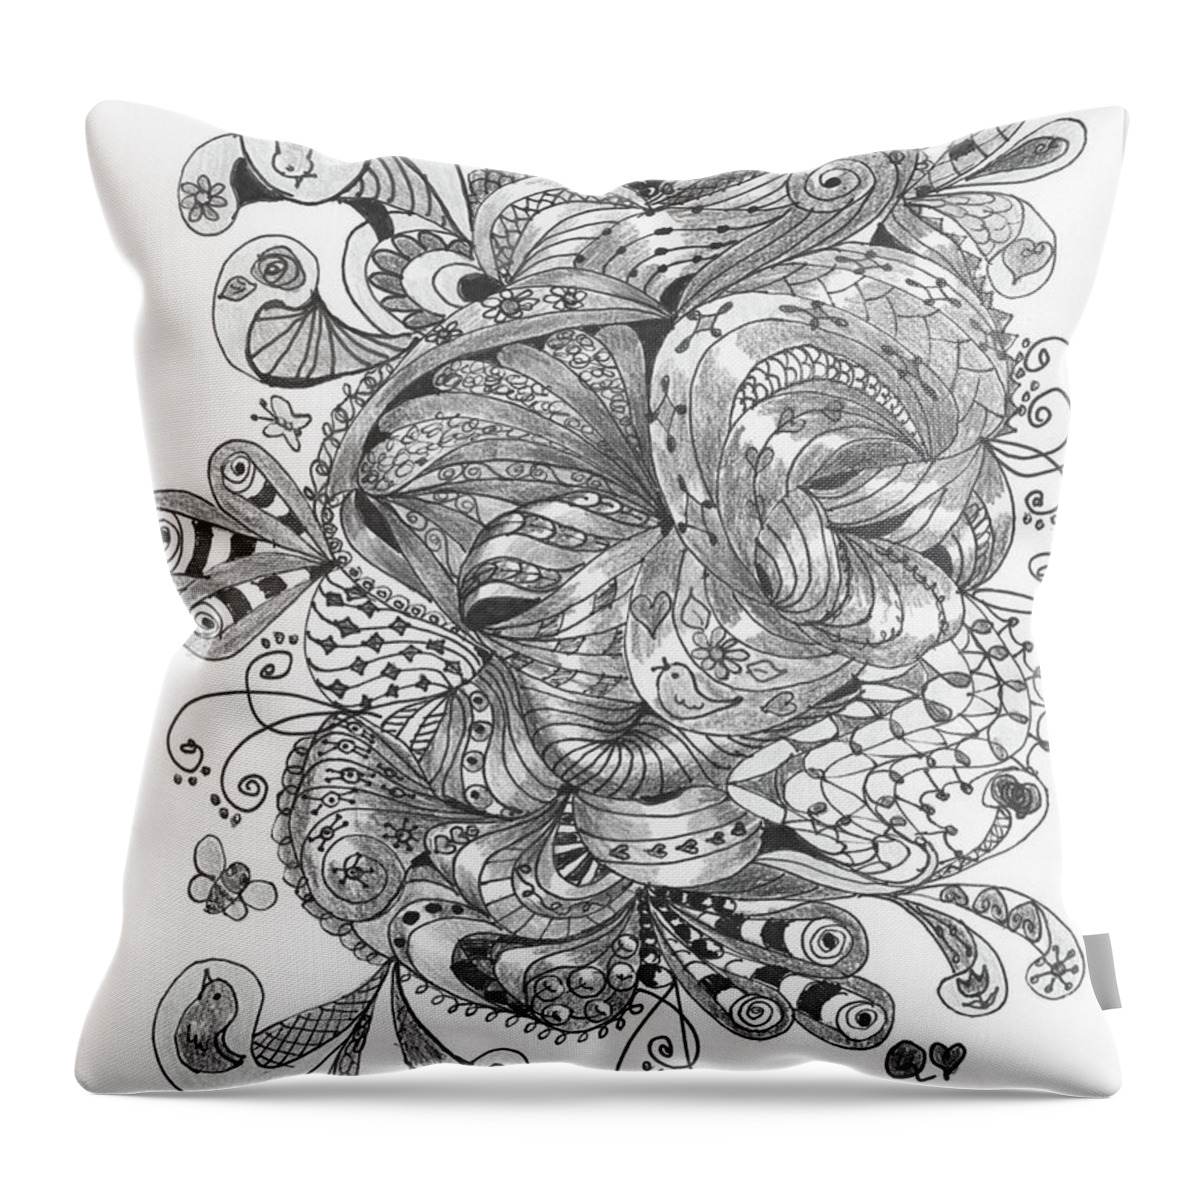 Zentangle©️ Throw Pillow featuring the drawing Abstract2 by Quwatha Valentine